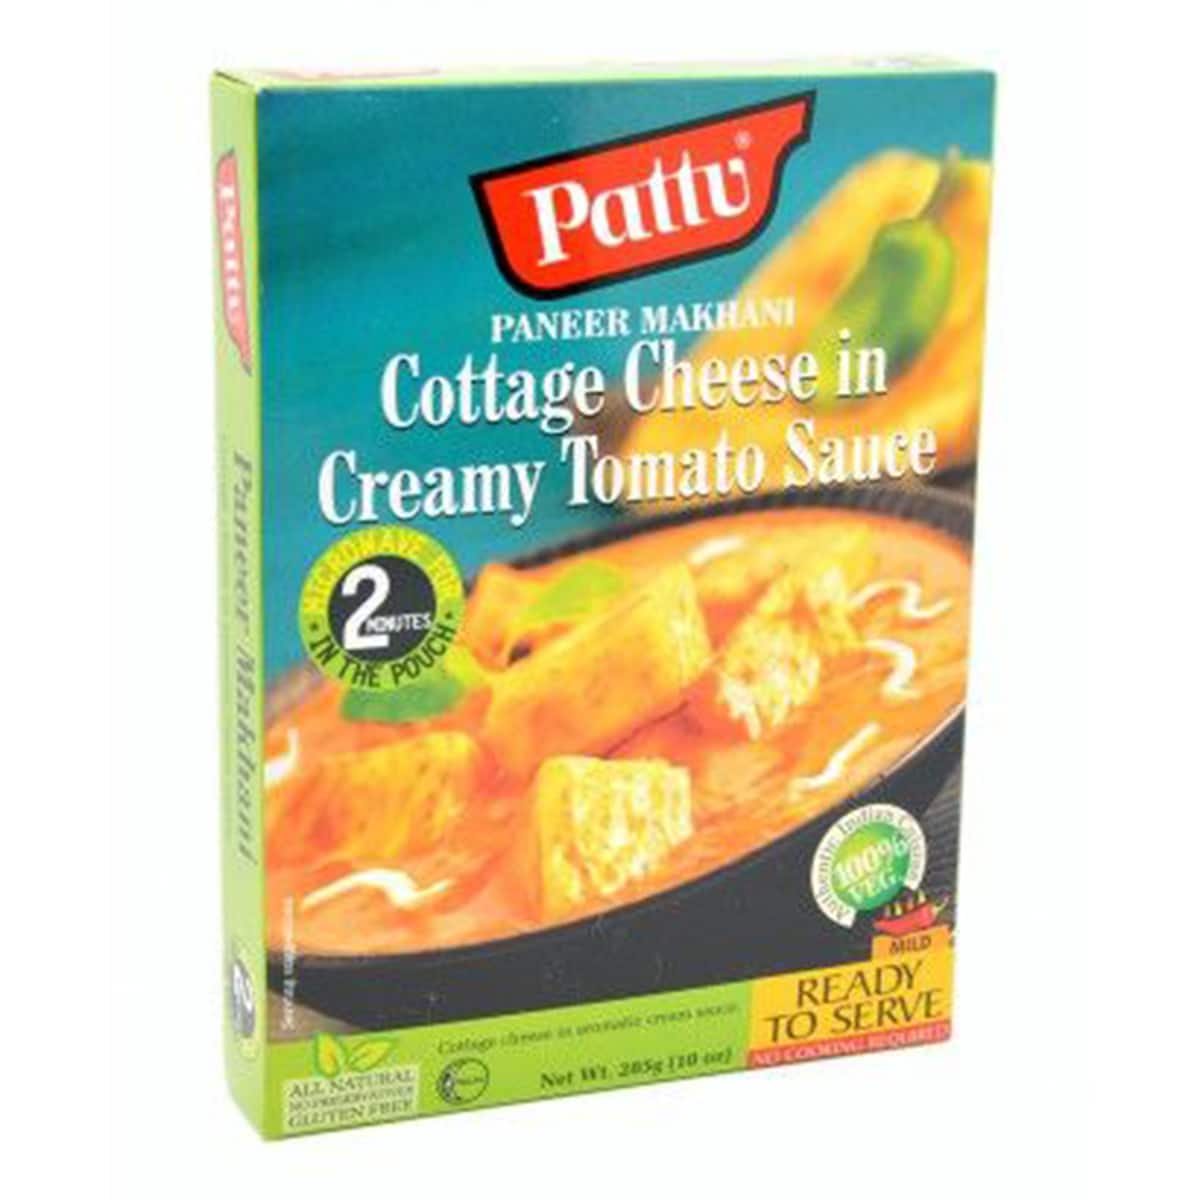 Buy Pattu Paneer Makhani (Cottage Cheese in Creamy Tomato Sauce) Ready to Serve - 285 gm